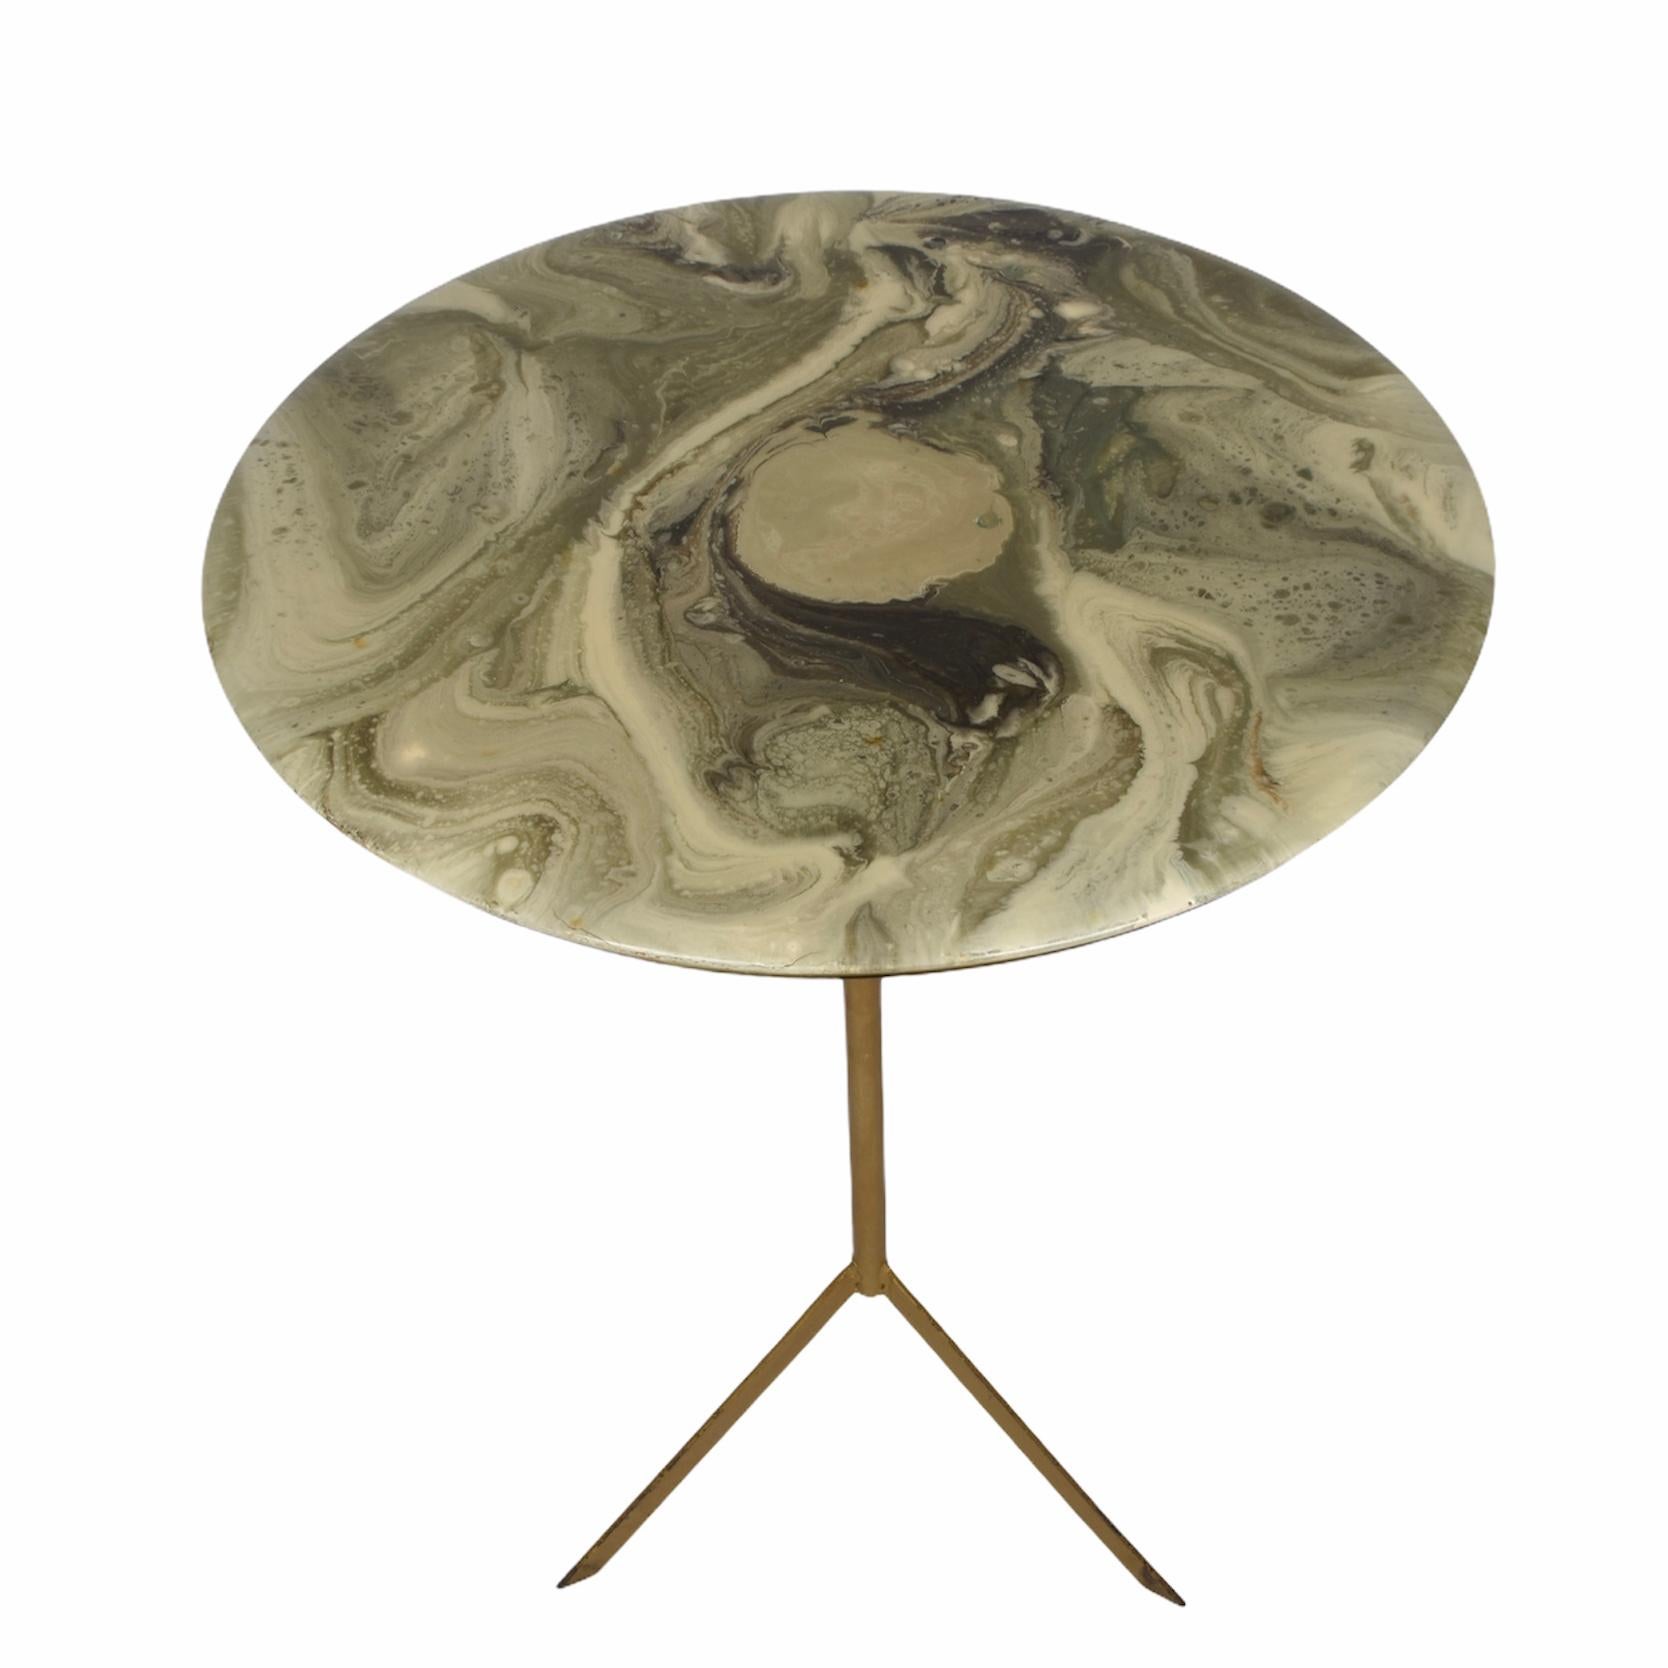 Midcentury Round Italian Gueridon Table with Marble Resin Top and Metal, 1950s For Sale 4